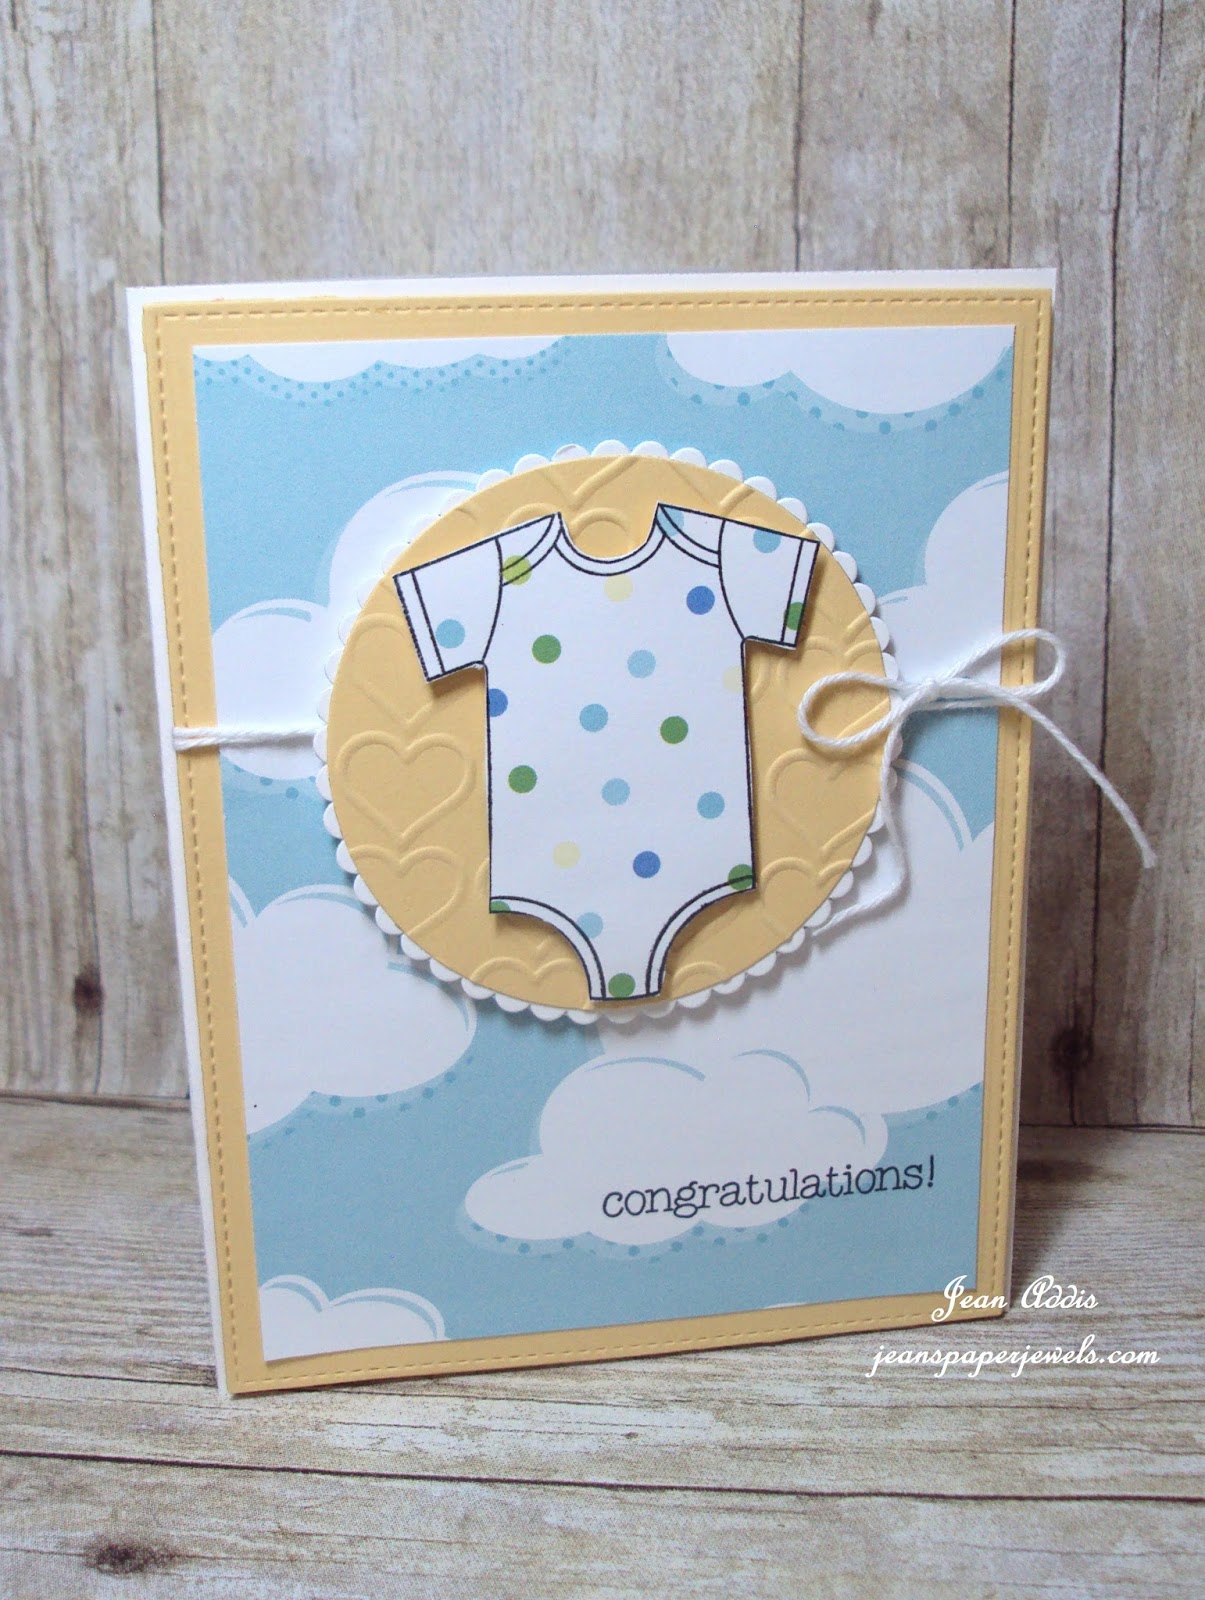 Jean's Paper Jewels: Stampin' Up! Made With Love